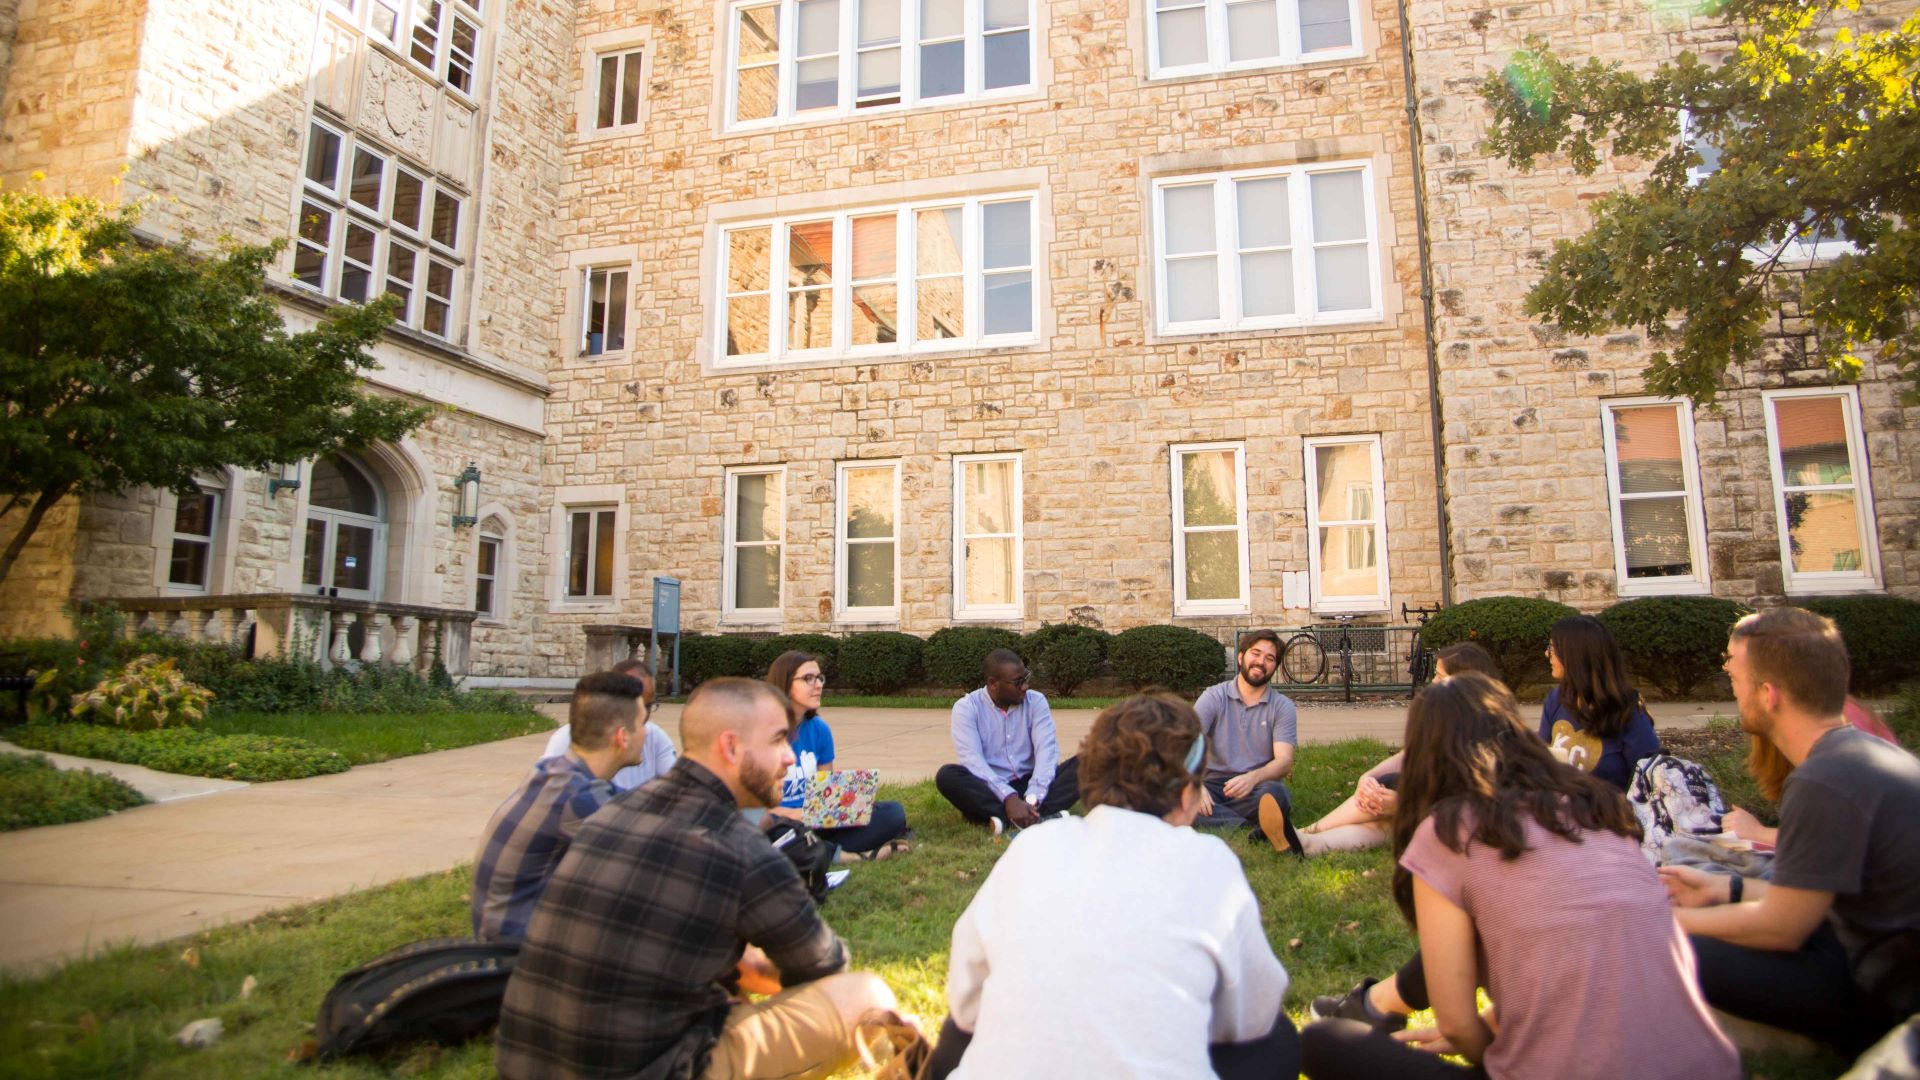 Students sitting in circle on grass on campus